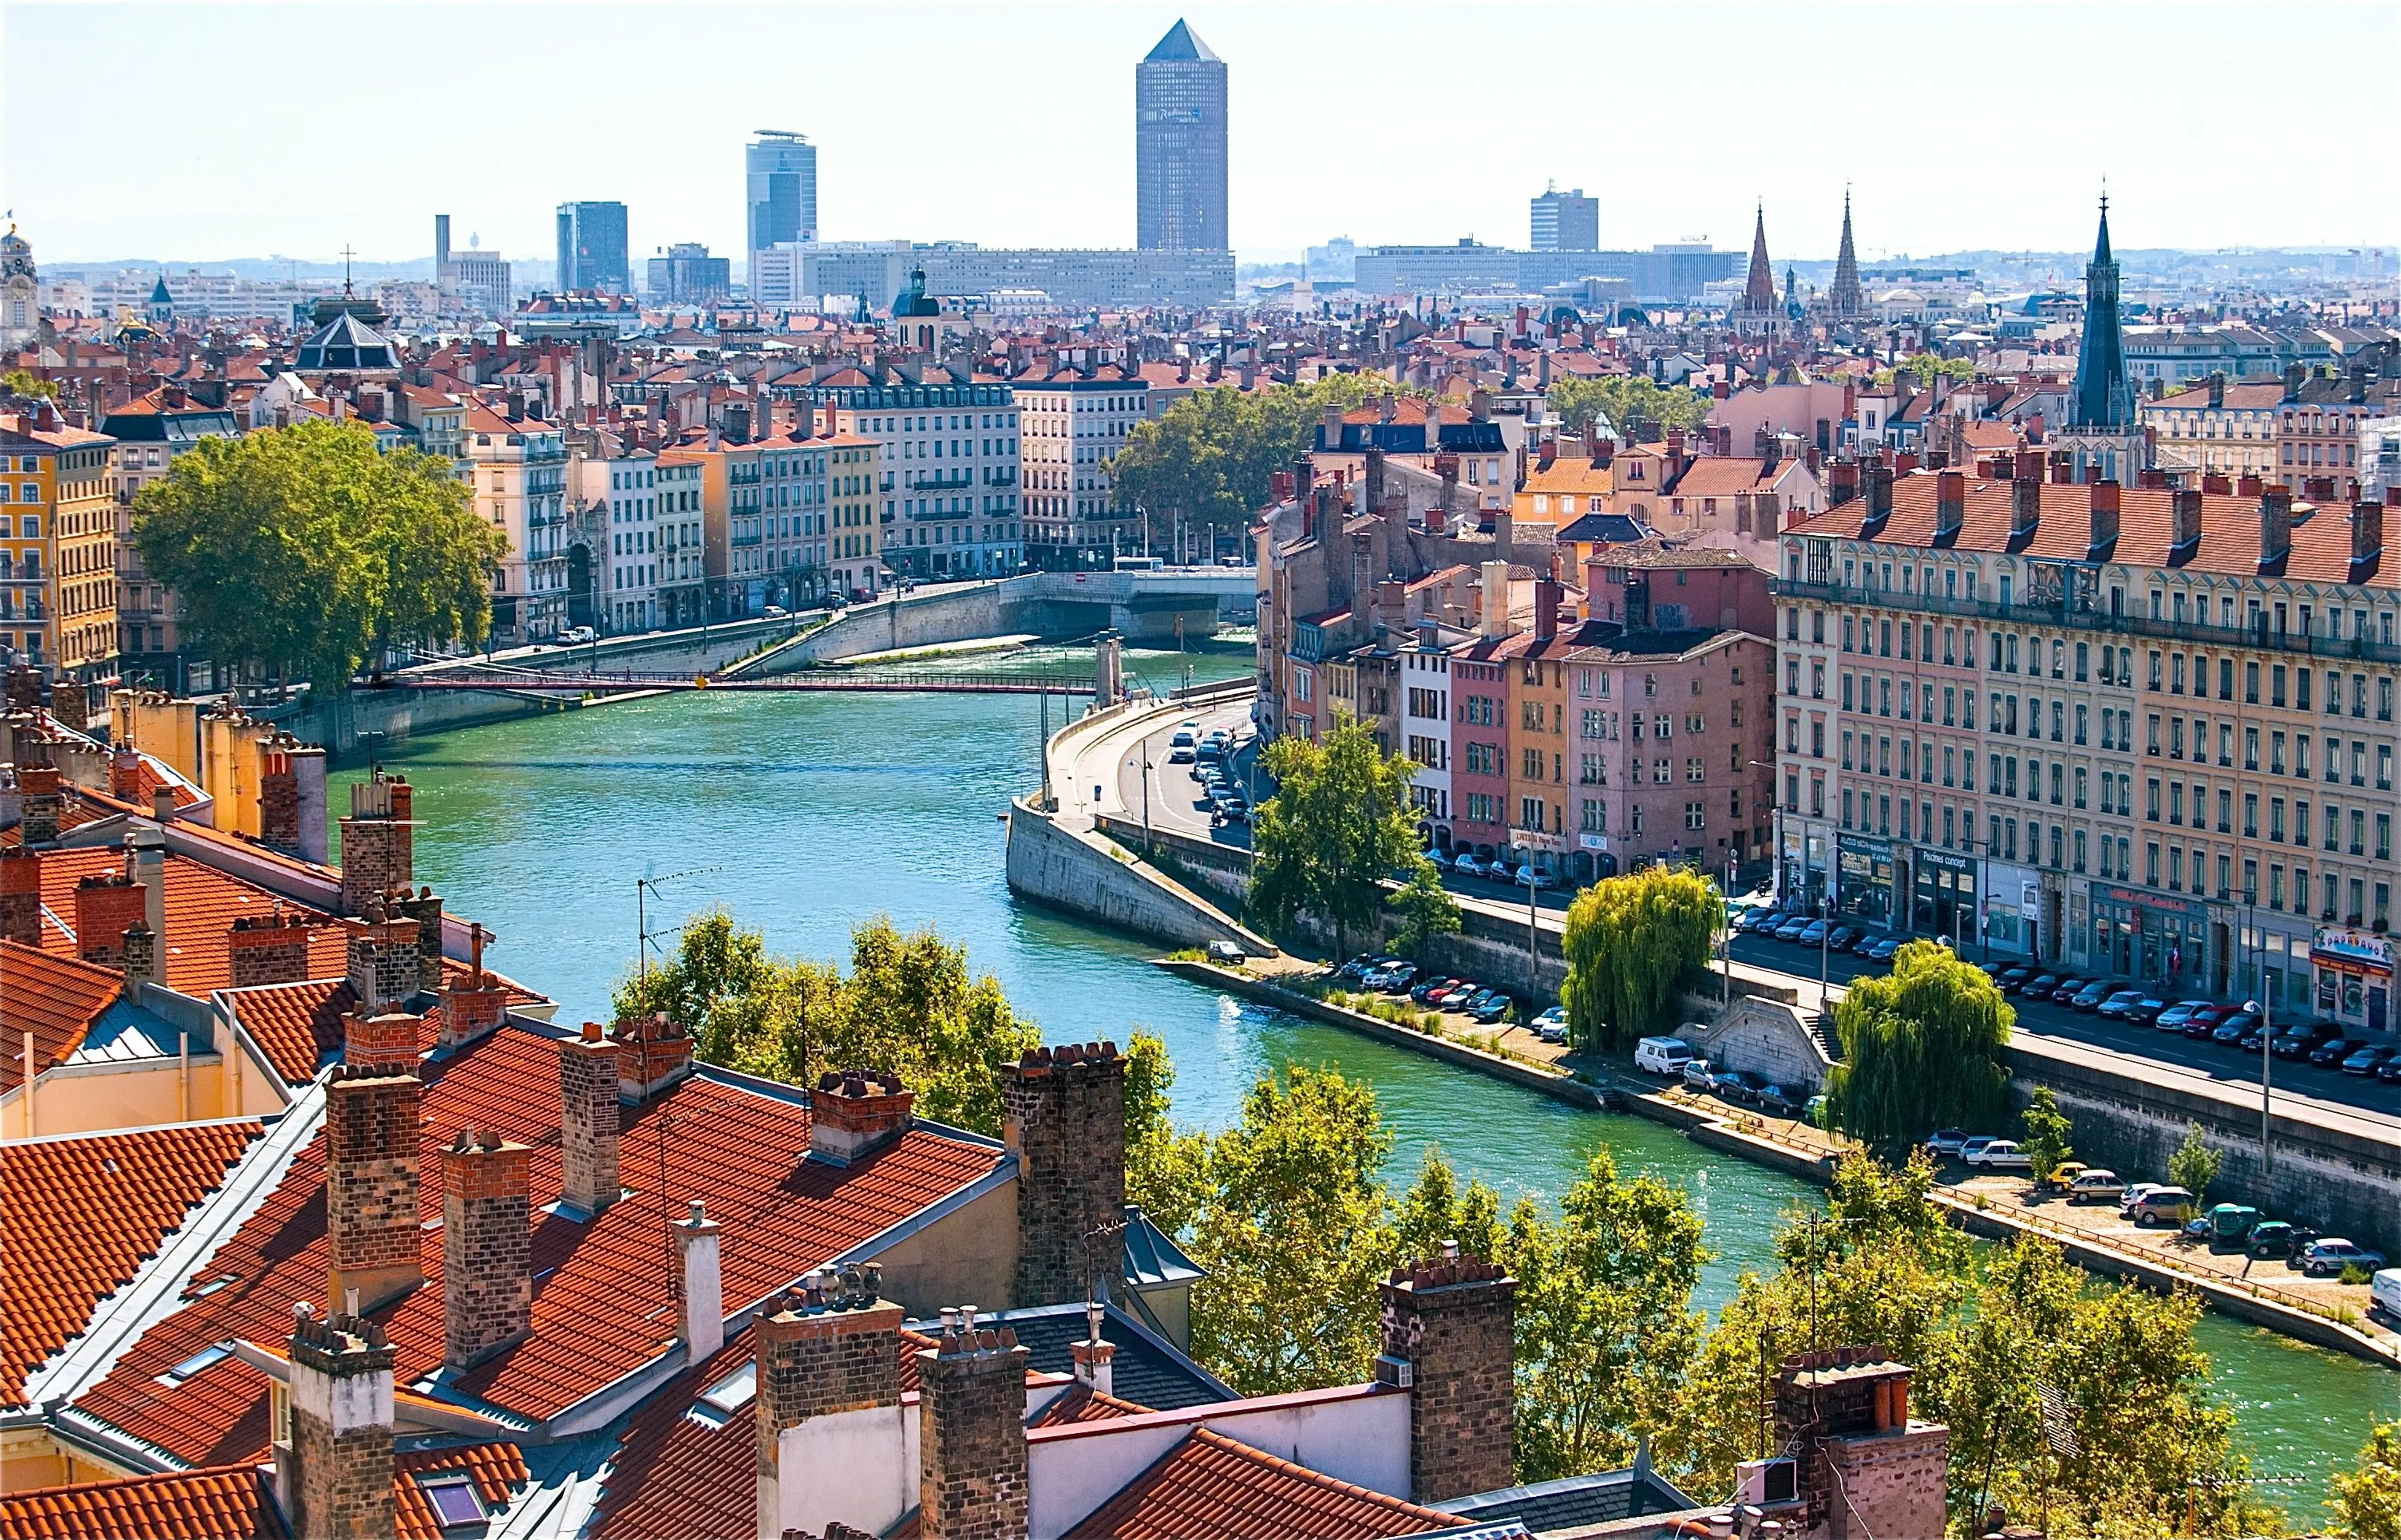 The city spreading across both banks of the Saone river